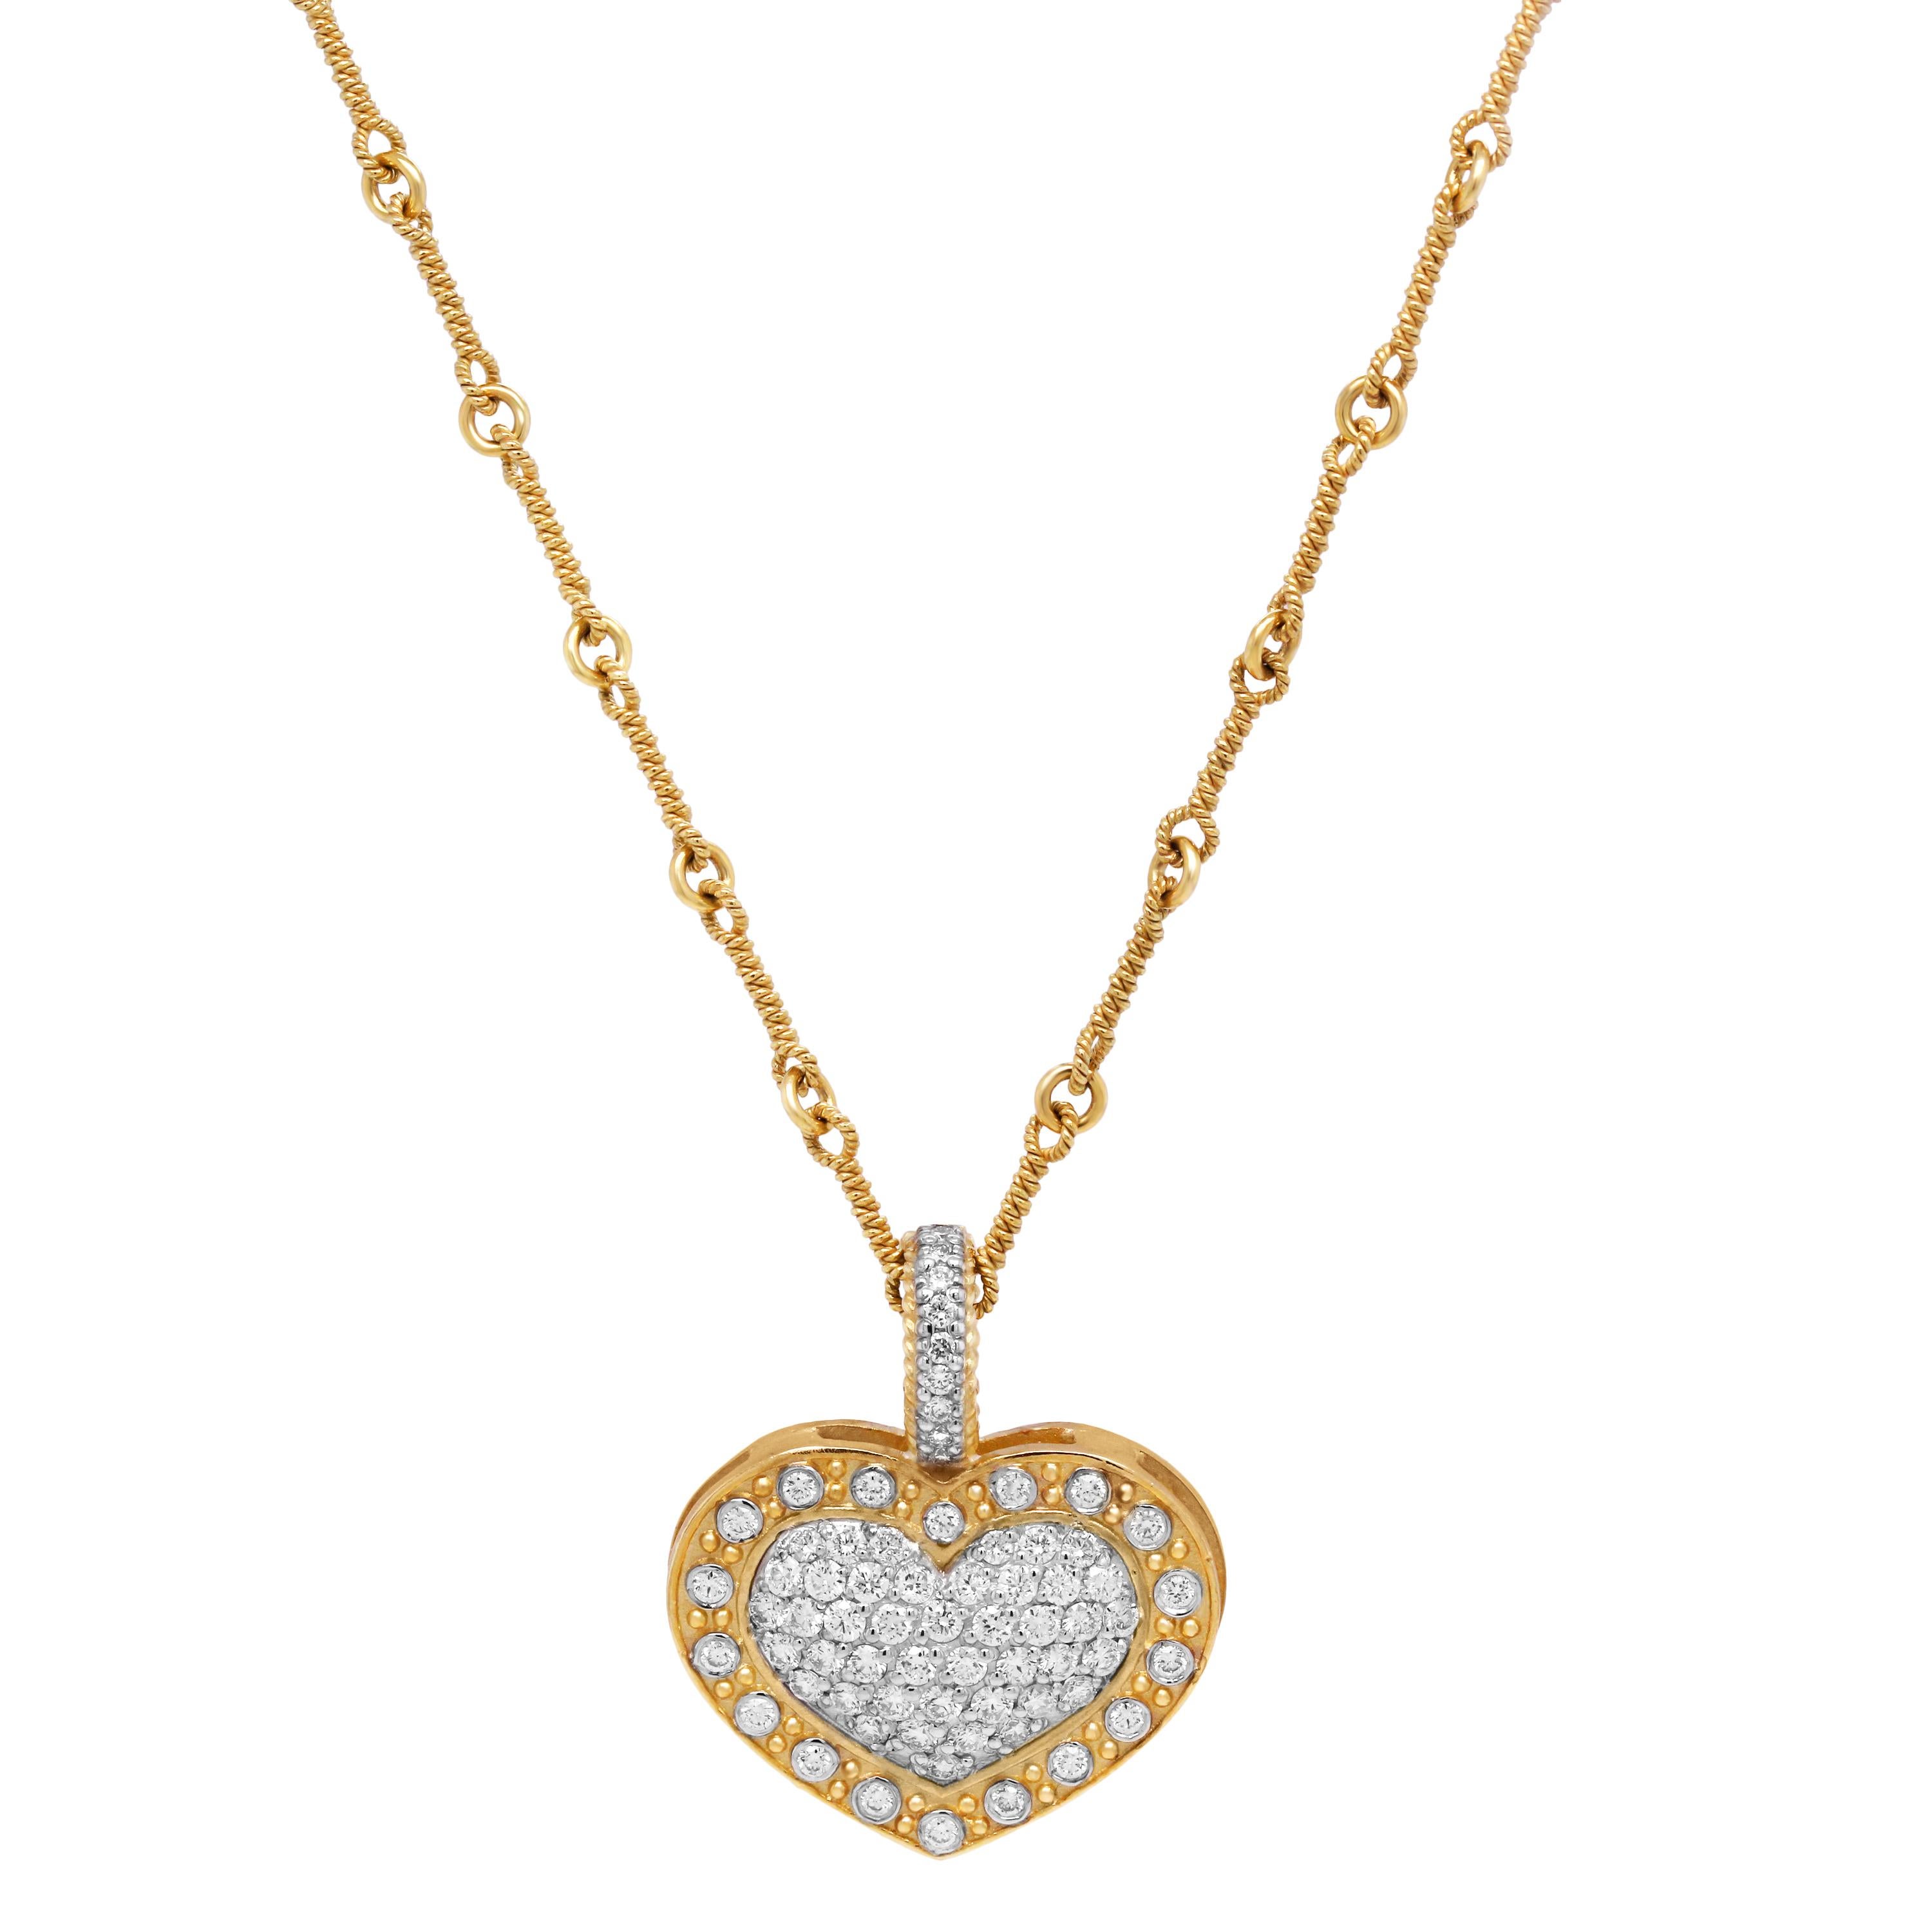 Stambolian 18 Karat Yellow White Gold Diamond Heart Enhancer Pendant Necklace

This beautiful heart pendant features diamonds pavé set in the center with a row of diamonds bezel set, surrounding.

A handmade bone chain is used that is also solid 18k